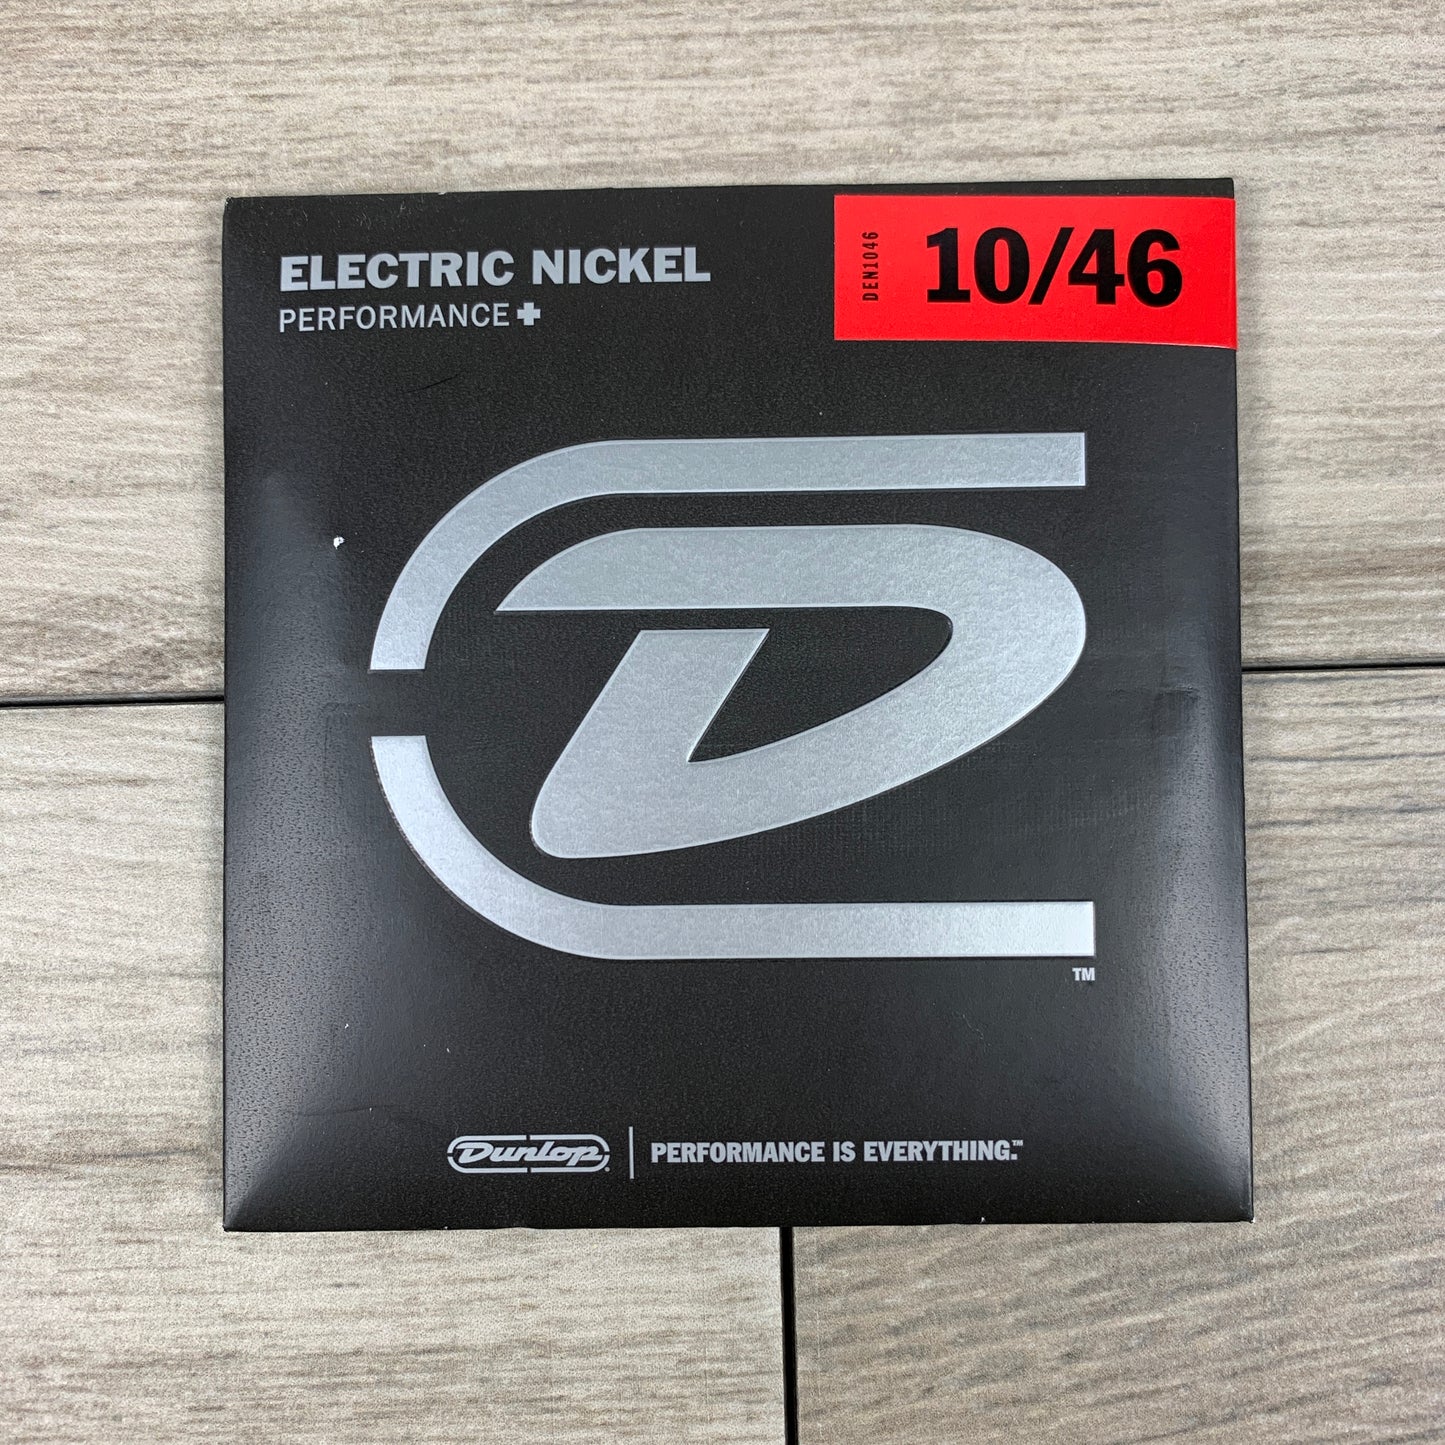 Dunlop Performance+ Nickel Wound Electric Guitar Strings 10-46, Light